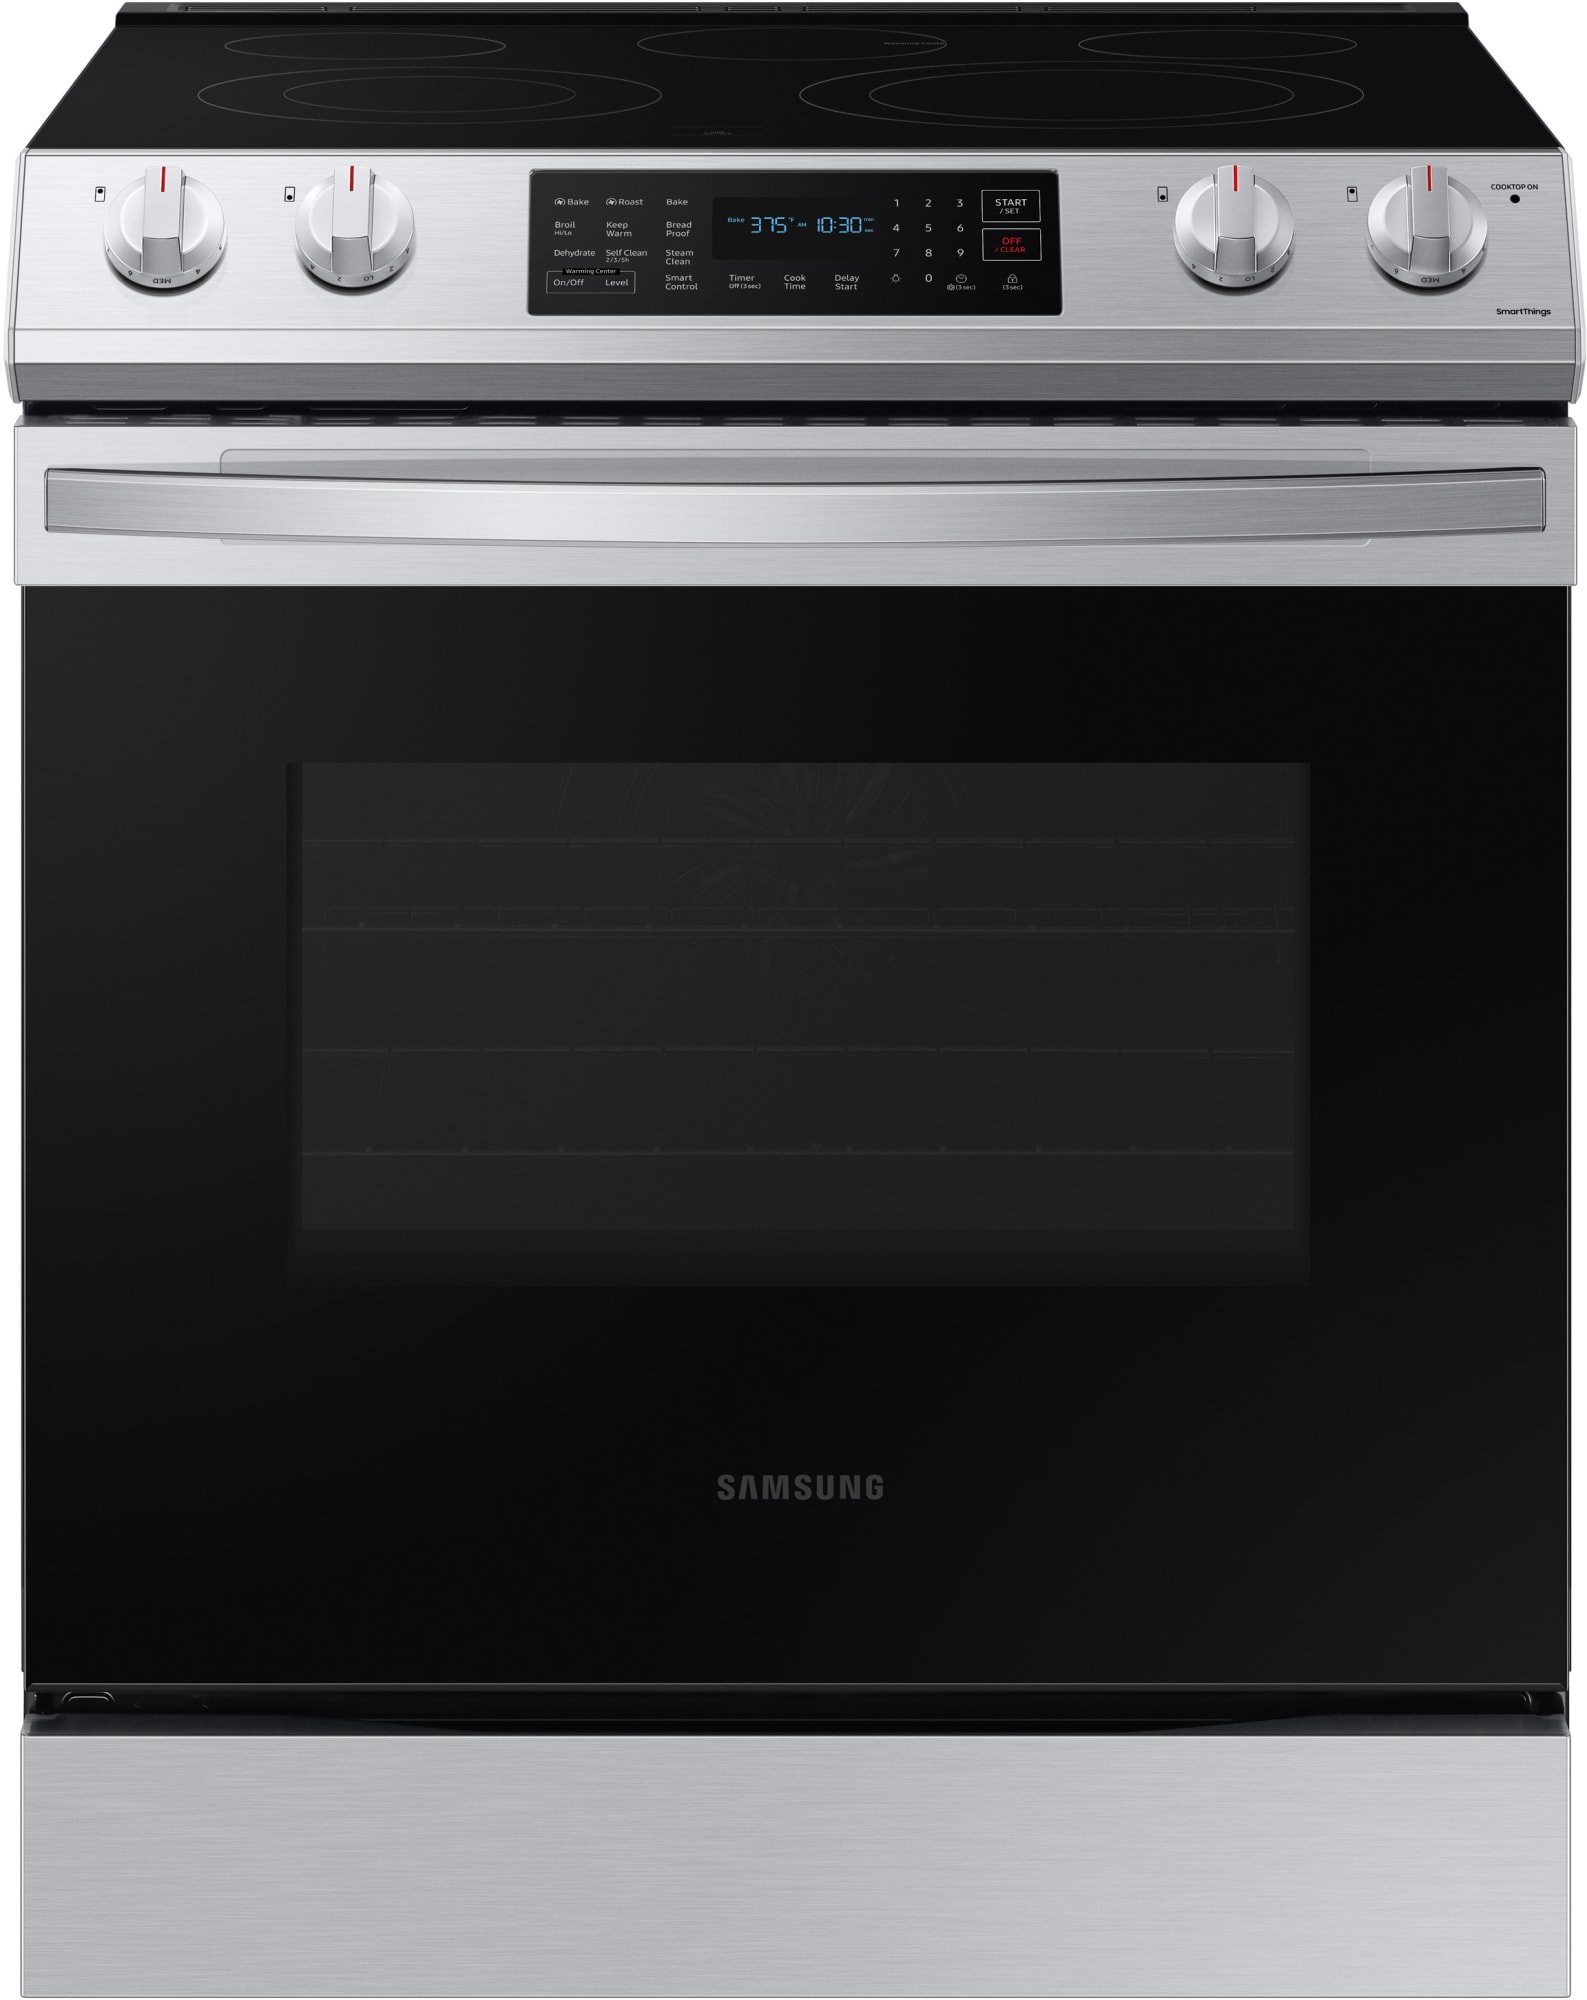 Samsung NE63T8311SS 30 Inch Slide-In Electric Smart Range with 5 Element Cooktop, 6.3 Cu. Ft. Oven Capacity, Storage Drawer, Convection, Self + Steam Clean, WiFi, Sabbath Mode, CSA Certified, Star-K Certified, and ADA Compliant: Fingerprint Resistant Stainless Steel